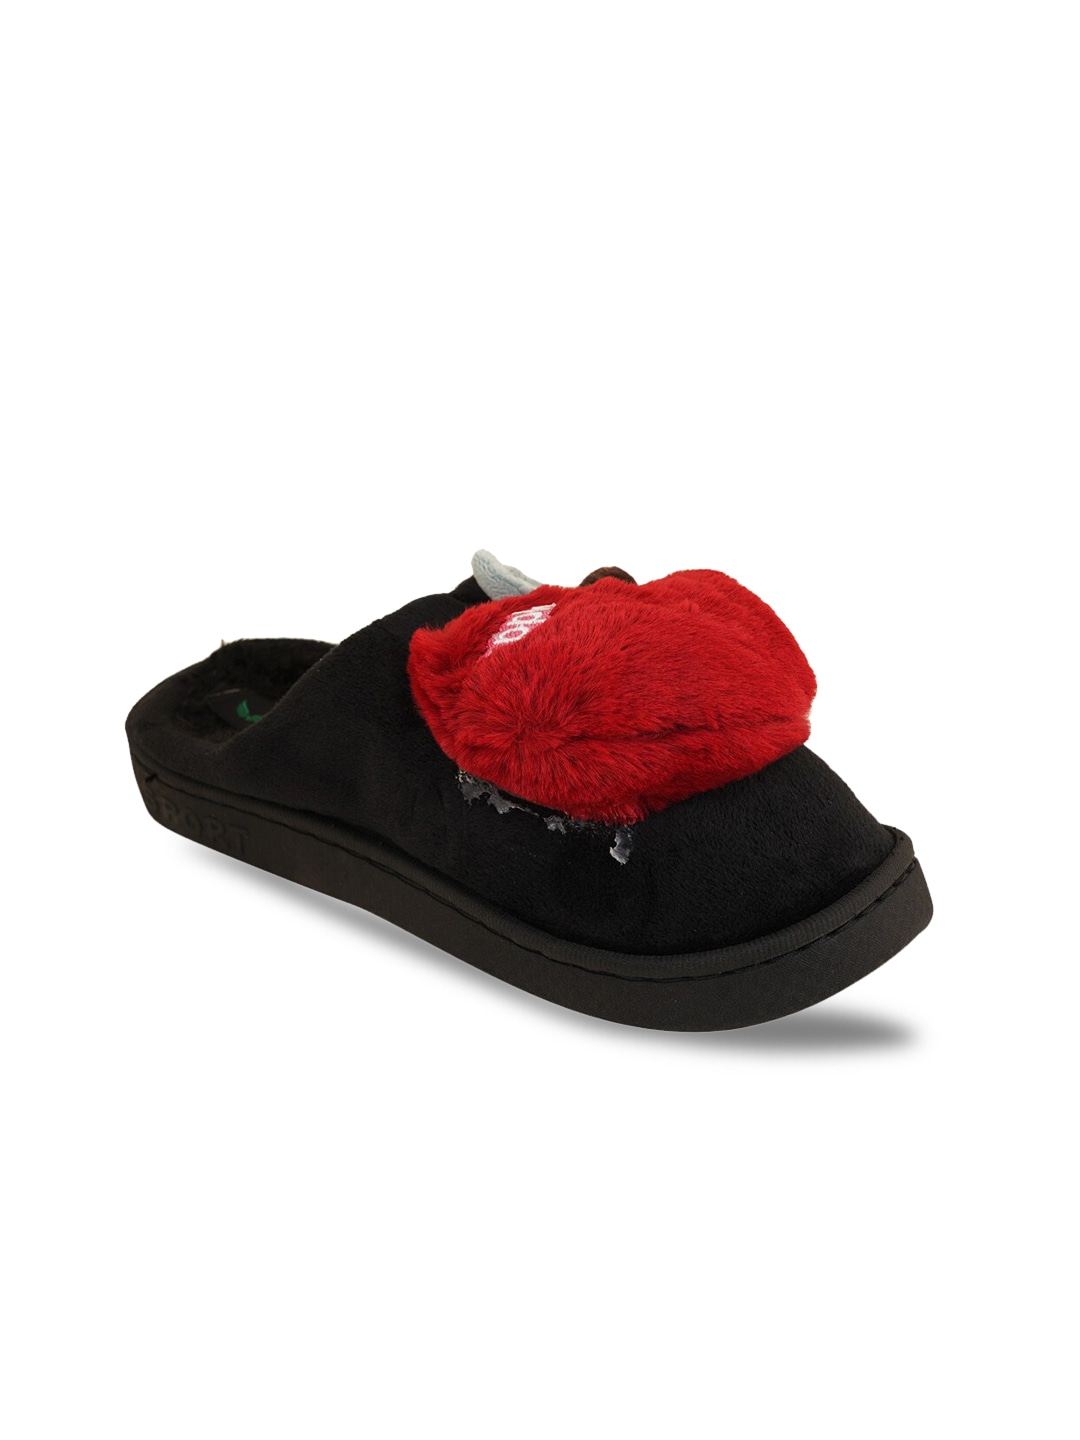 Walkfree Women Black & Red Room Slippers Price in India